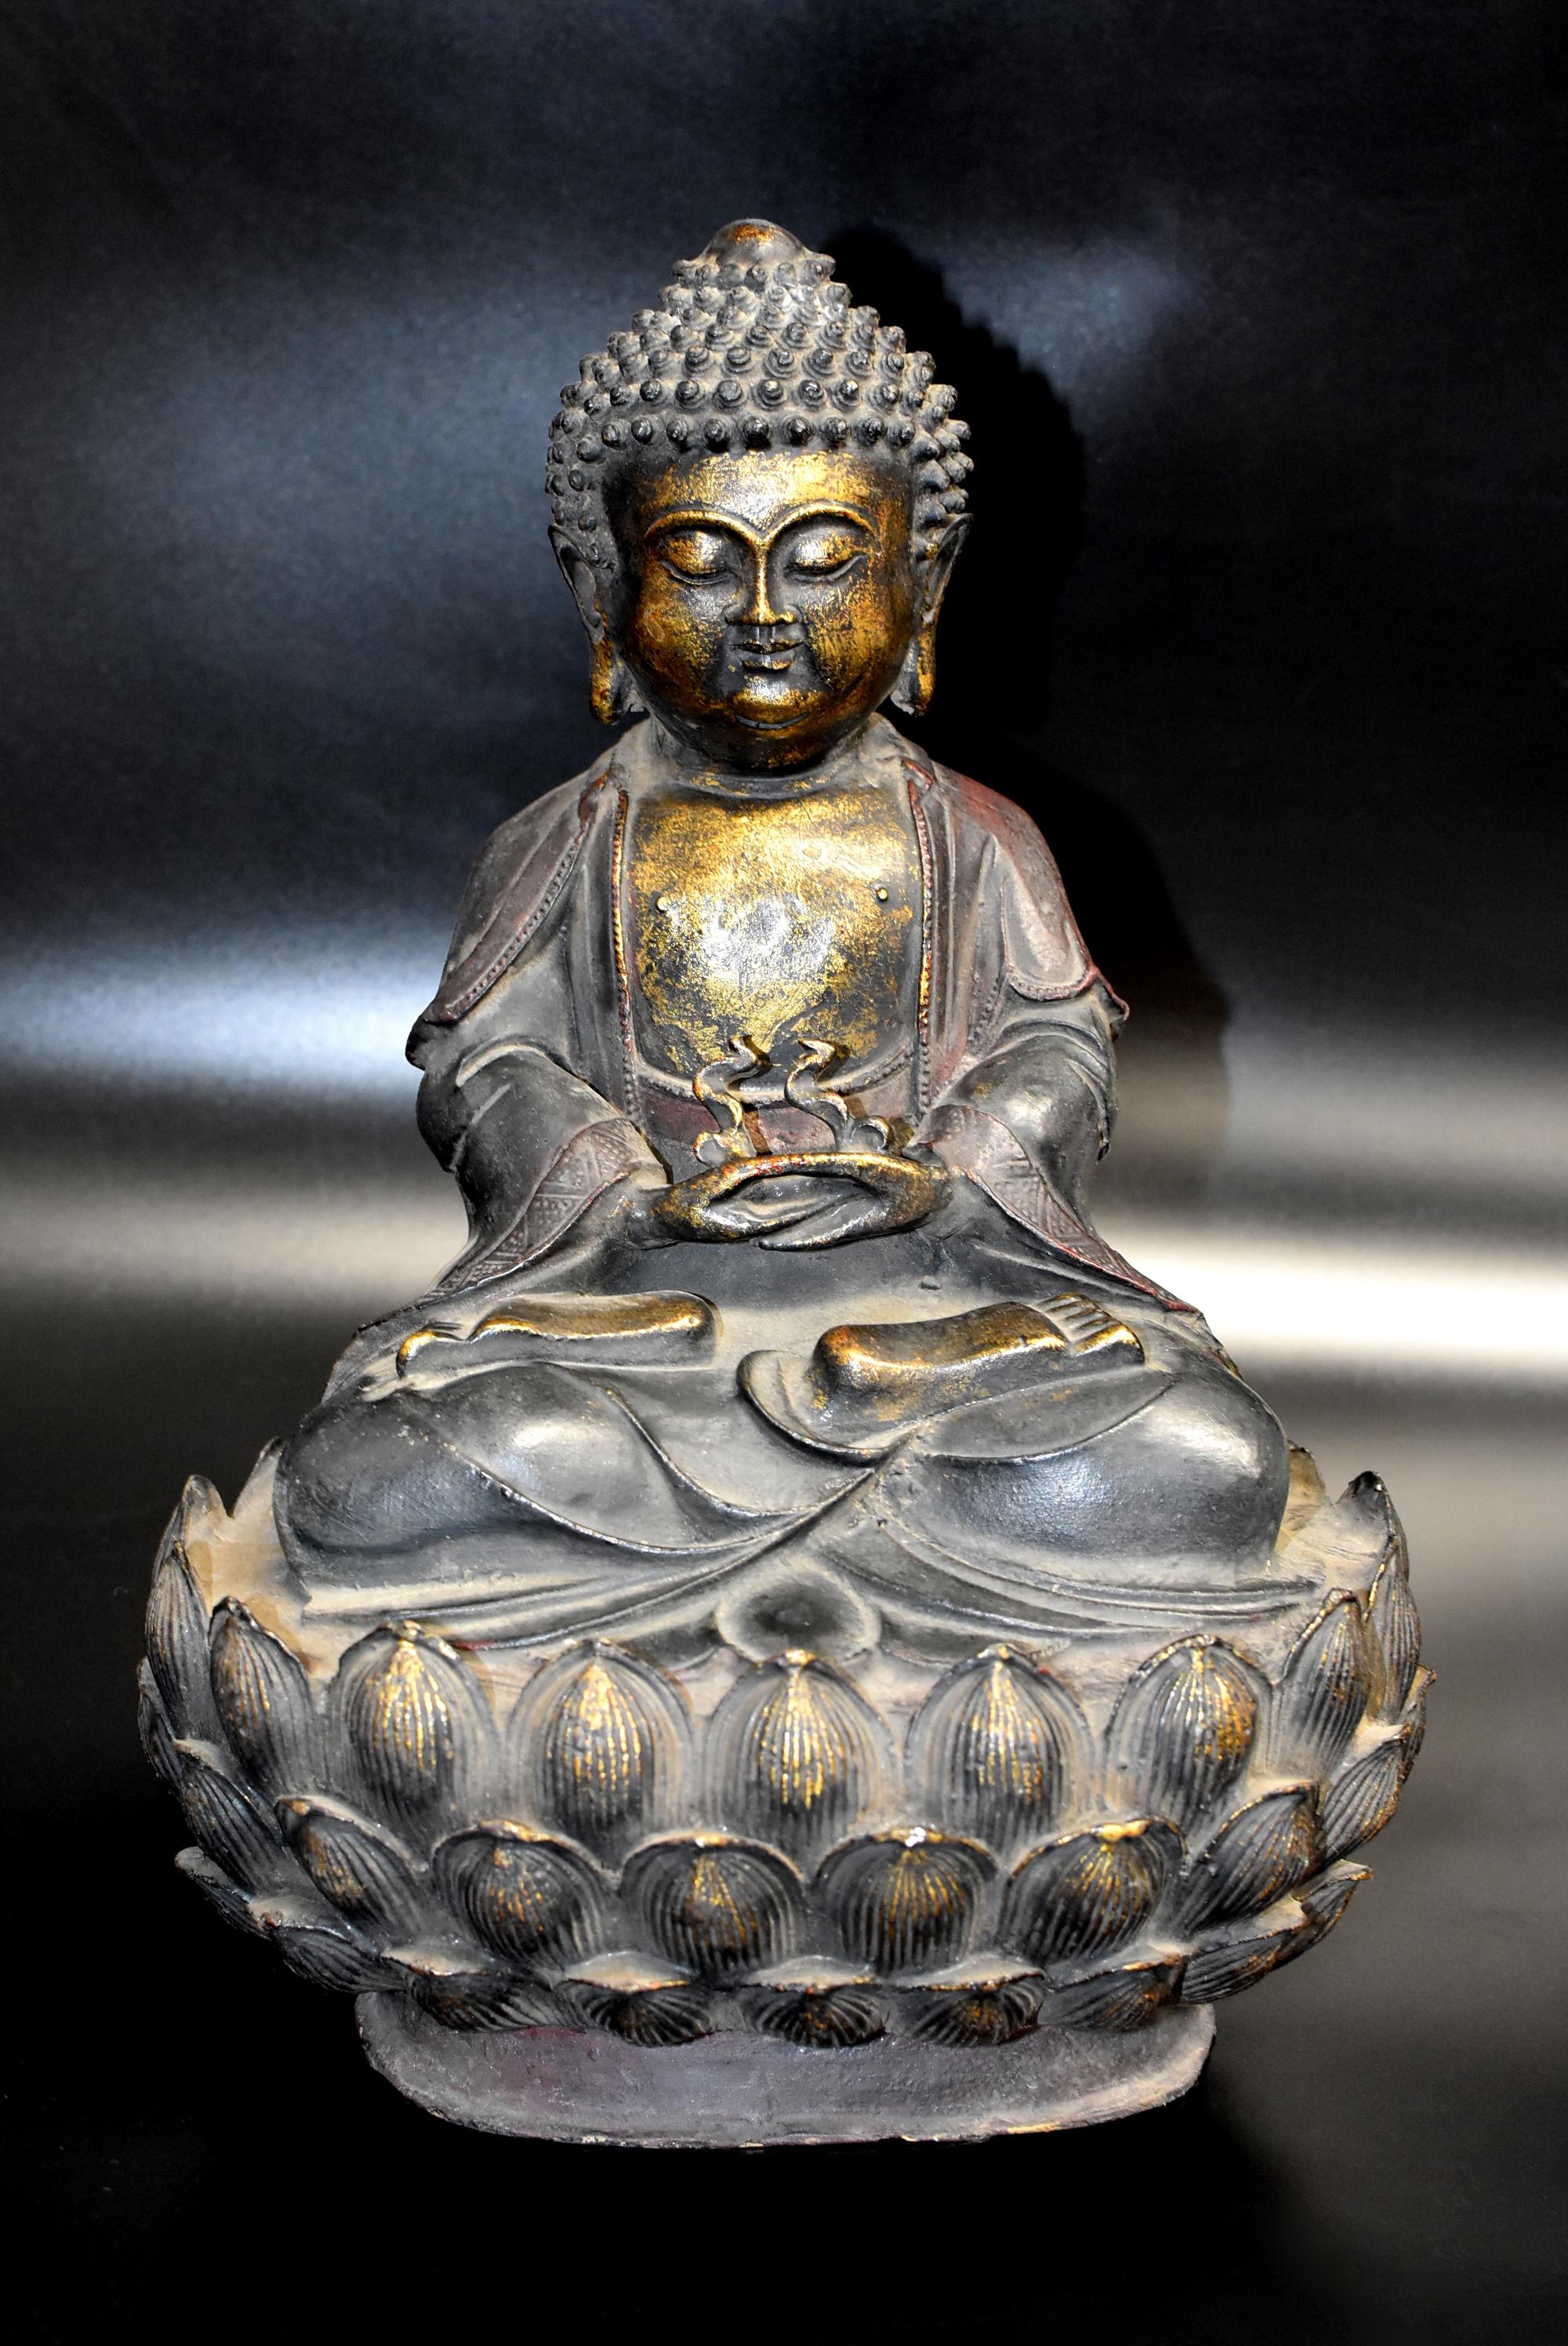 A large, beautiful bronze Buddha. Flanked by pendulous earlobes, the full face with slender bow-shaped eyes and hooded eyelids casting a serene and meditative aura with downcast look, below evenly arched eyebrows tapering at the ends issuing from